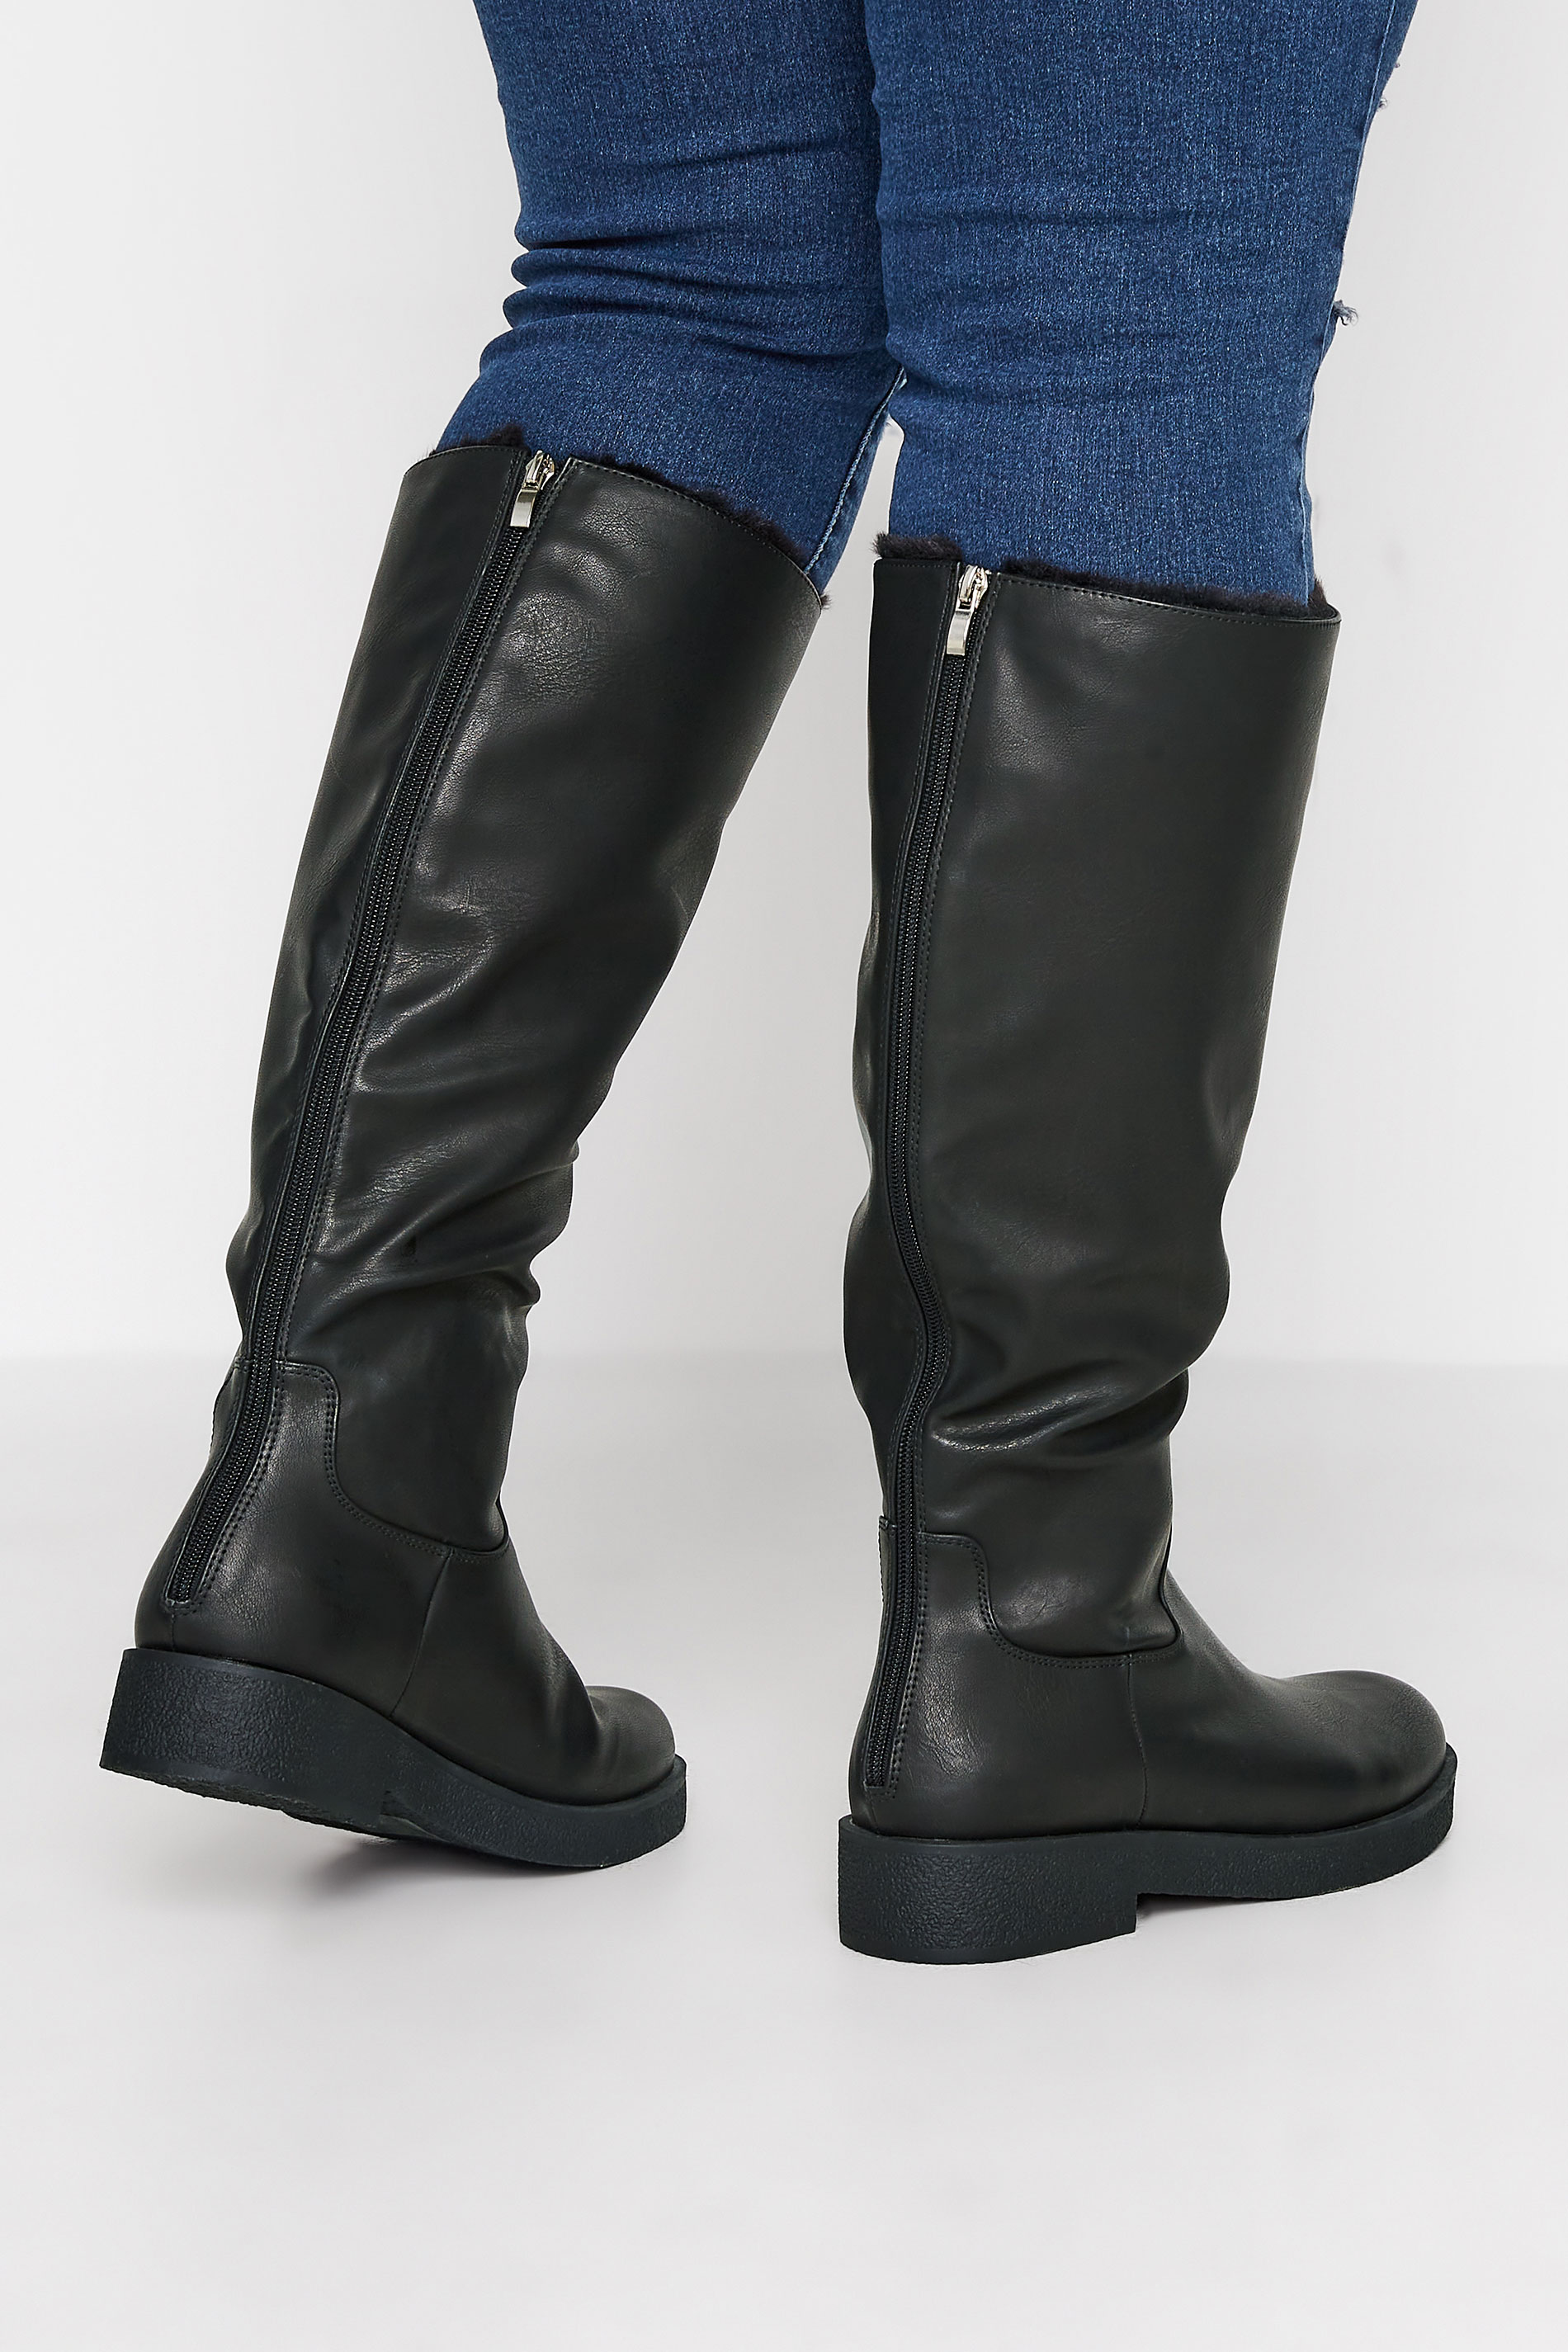 LIMITED COLLECTION Black Fur Lined Knee High Boots In Wide E Fit | Yours Clothing 2